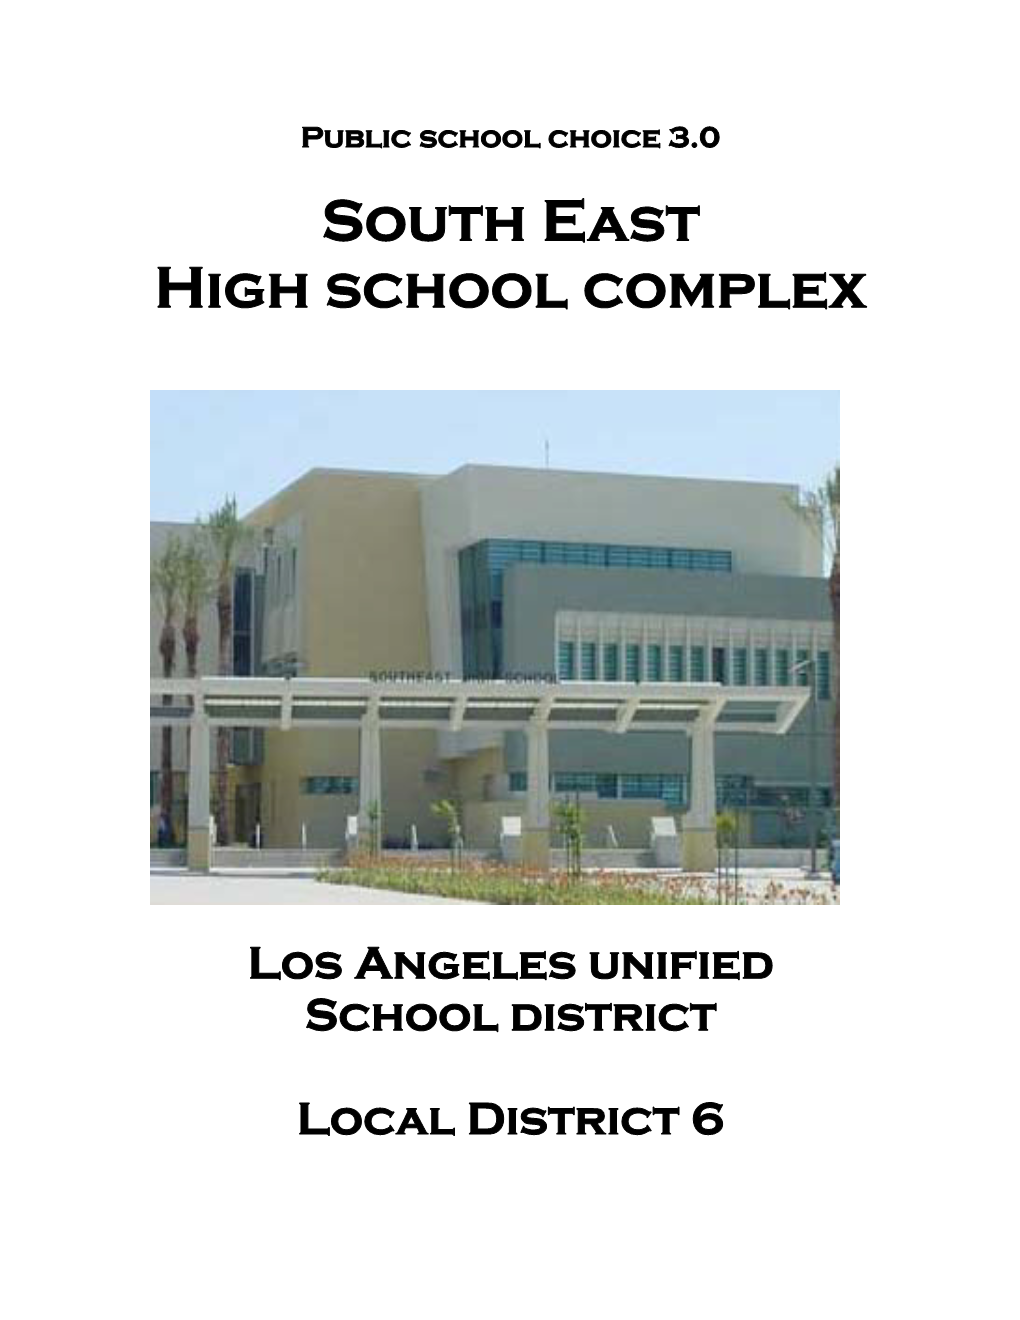 South East High School Complex